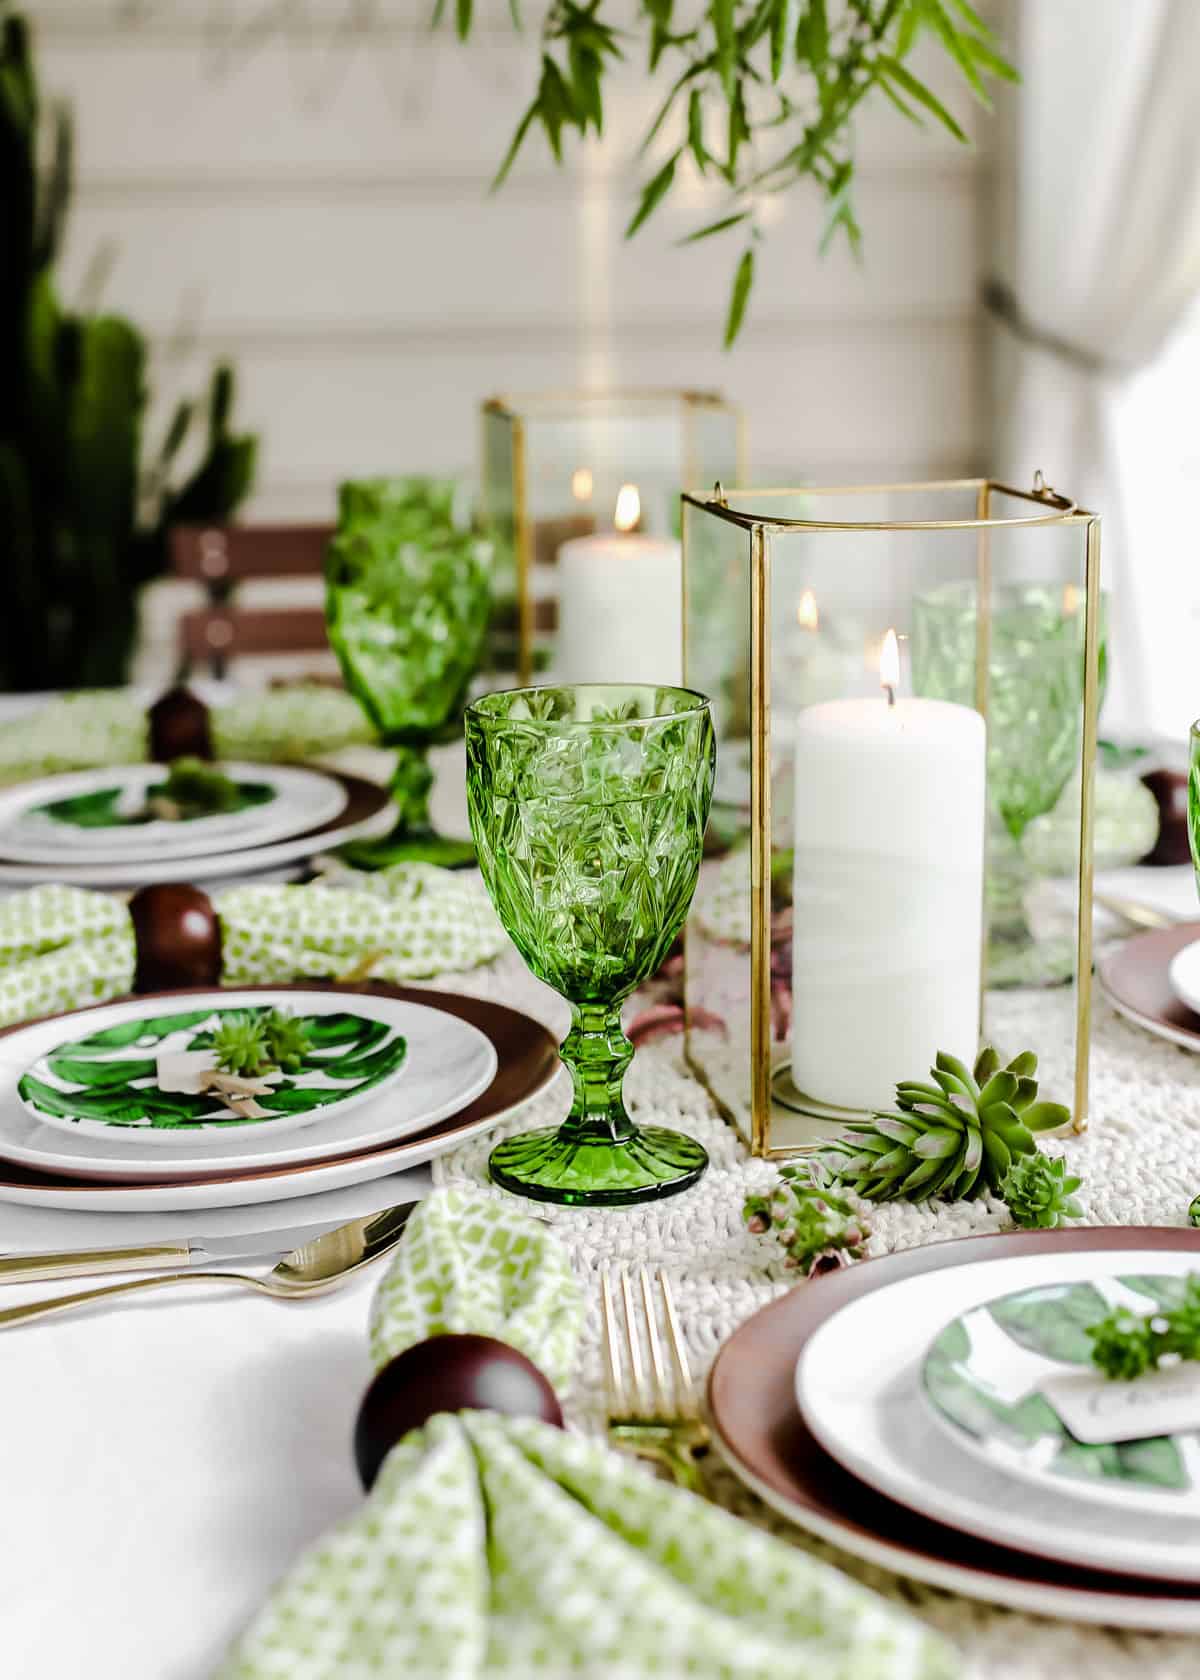 green and cream tablescape outdoors, with green plates and glasses and candle centerpiece.